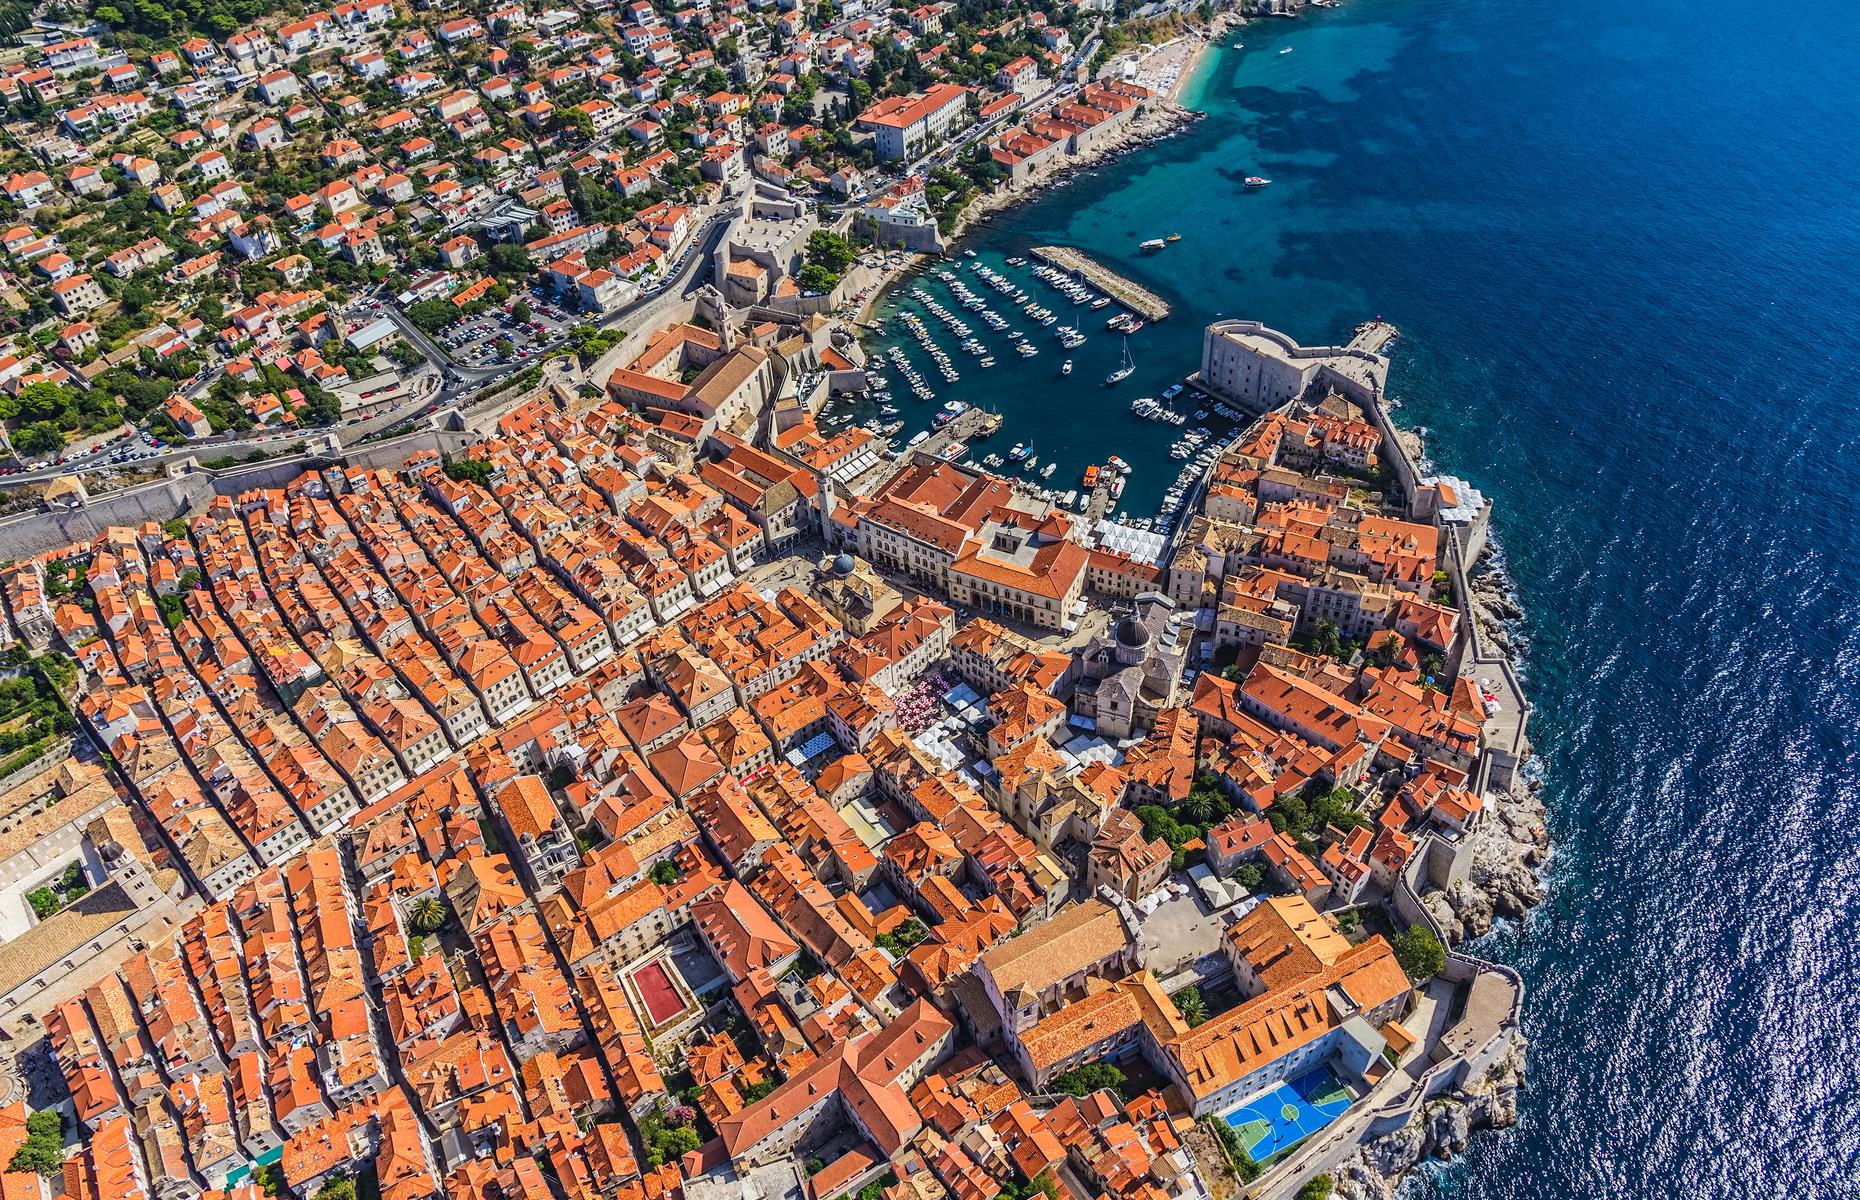 <p>The medieval walled city of <a href="https://www.loveexploring.com/news/92374/things-to-do-in-dubrovnik-game-of-thrones-dubrovnik-holidays-croatia">Dubrovnik</a> has earned film star status thanks to its appearance in movies and TV series including <em>Game of Thrones</em>, but it doesn’t need duels and dragons to bring it to life. Captured from above in this awe-inspiring shot, with its patchwork of terracotta buildings cradled by ancient limestone walls, the city looks as though it’s been plucked straight from a fantasy book. </p>